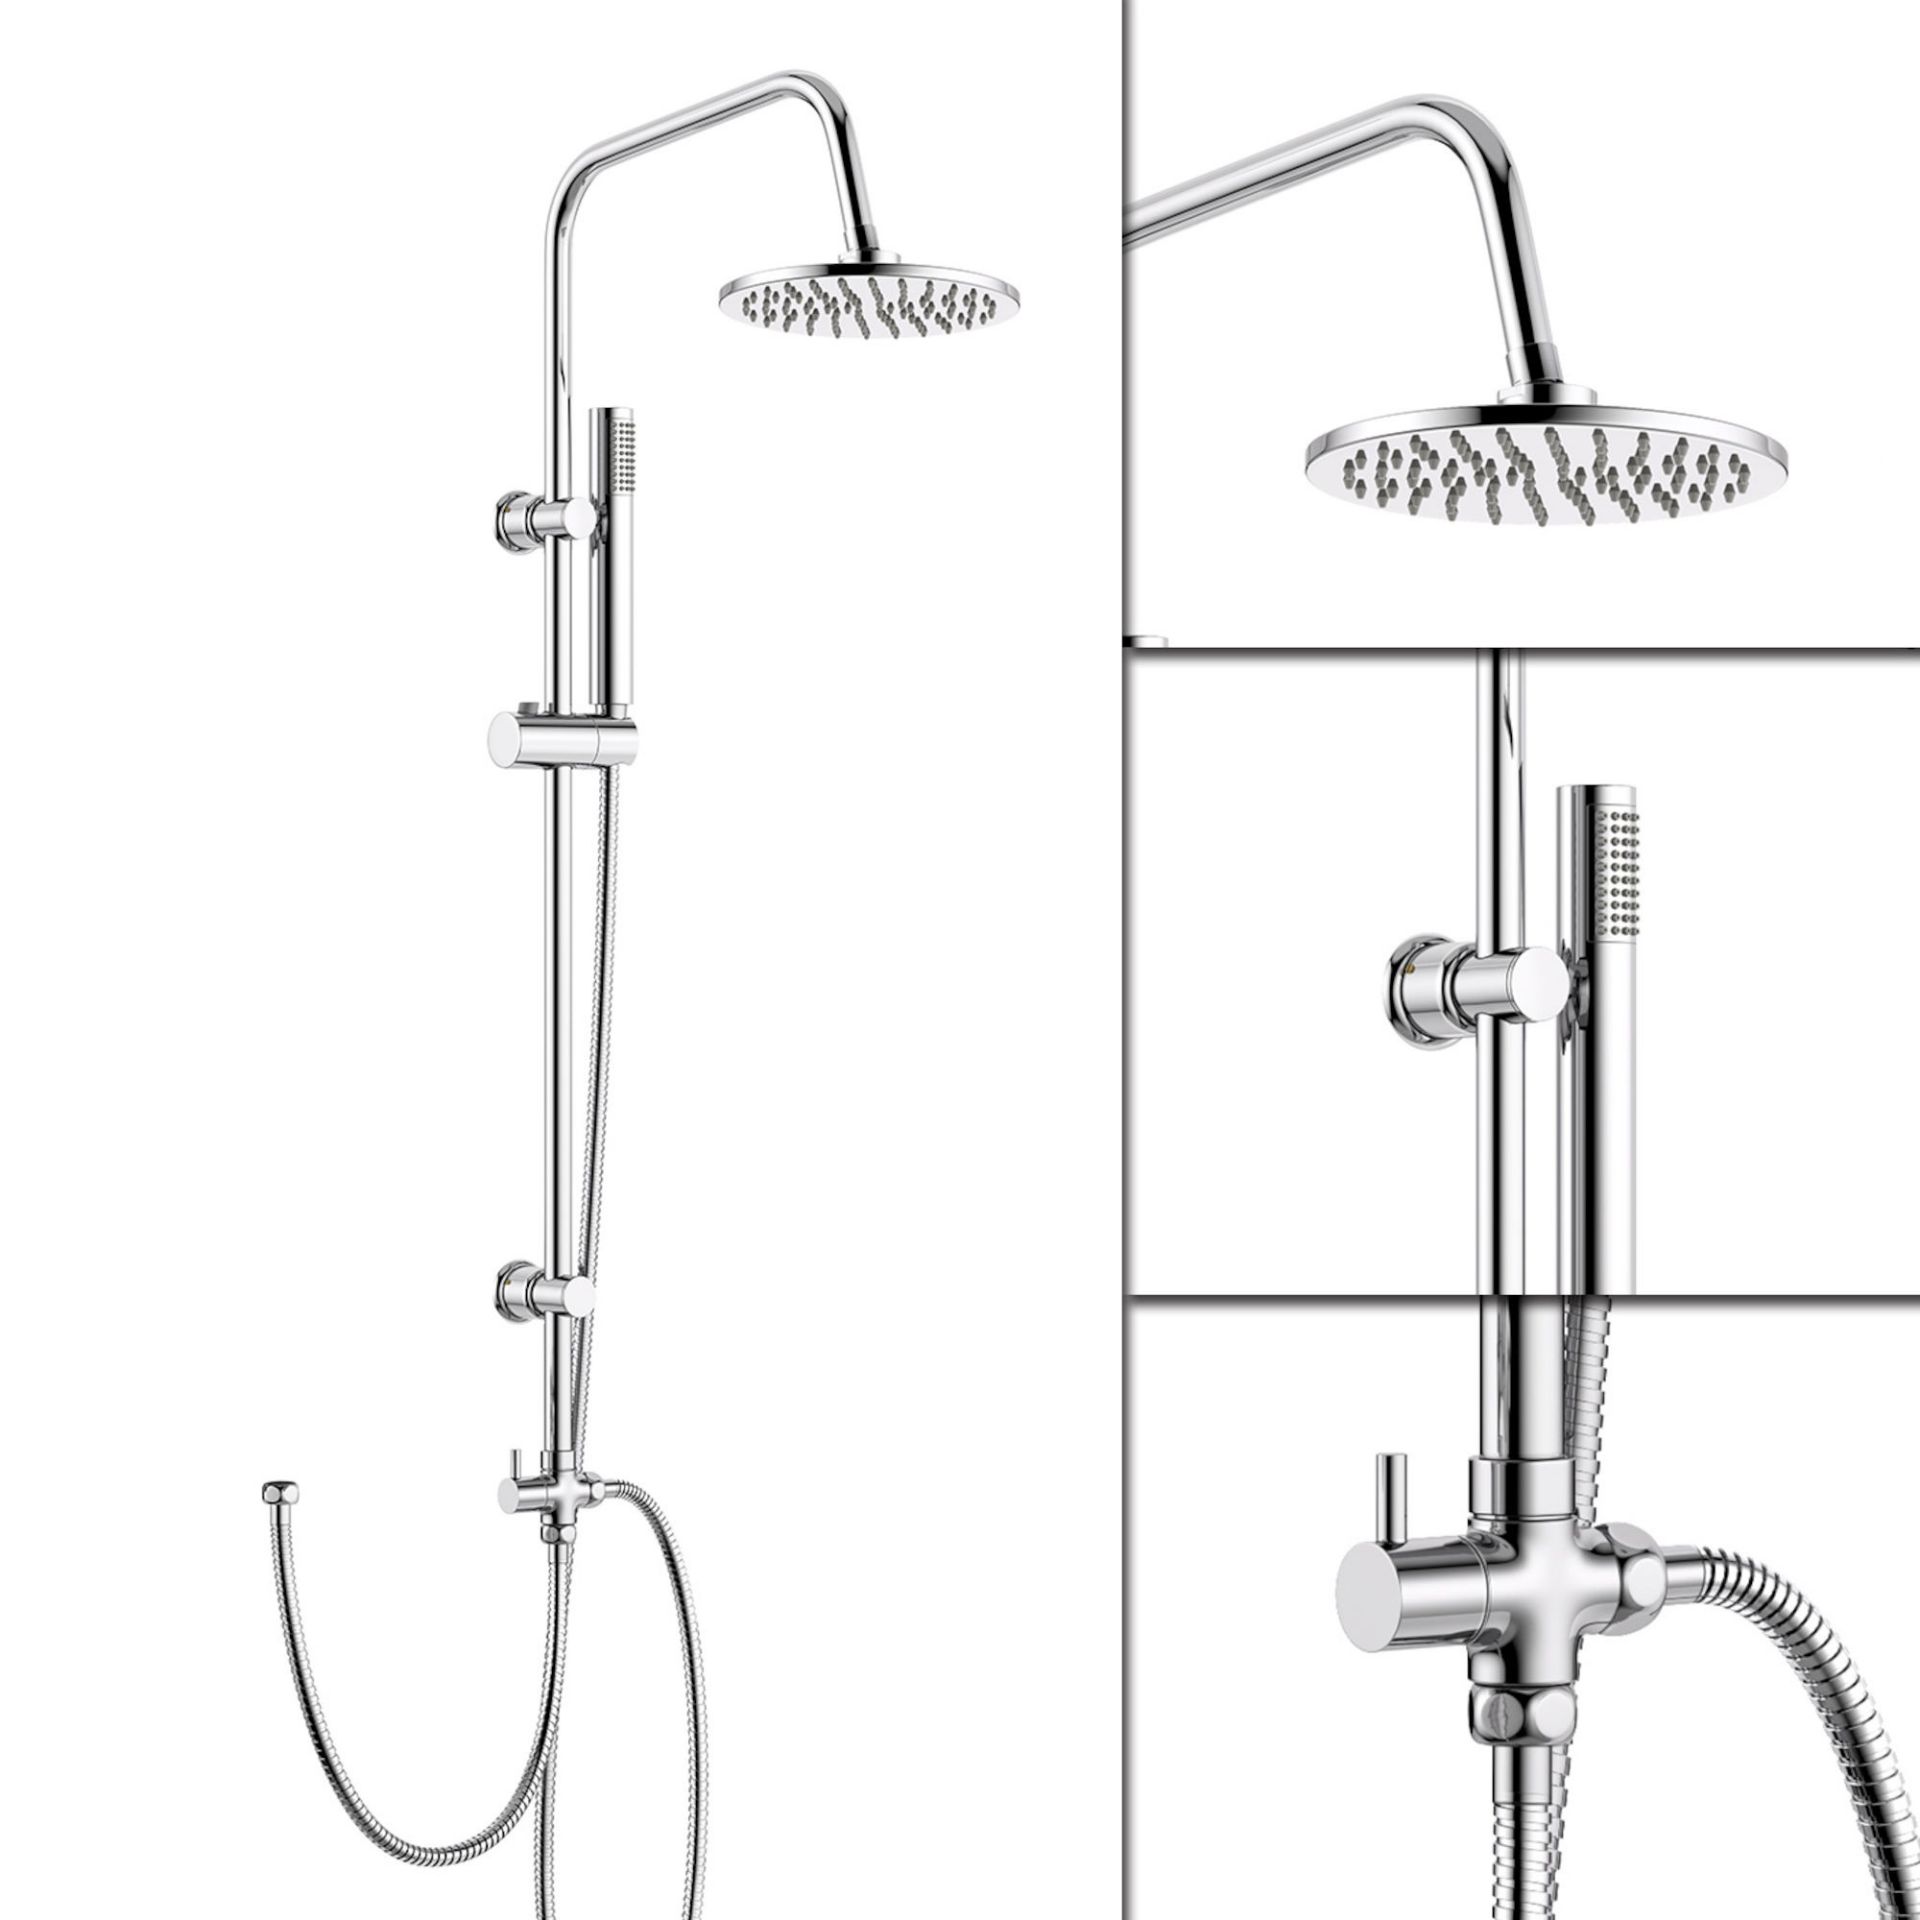 (XM48) Round Exposed Thermostatic Mixer Shower Kit & Large Head. Cool to touch shower for additional - Image 2 of 7